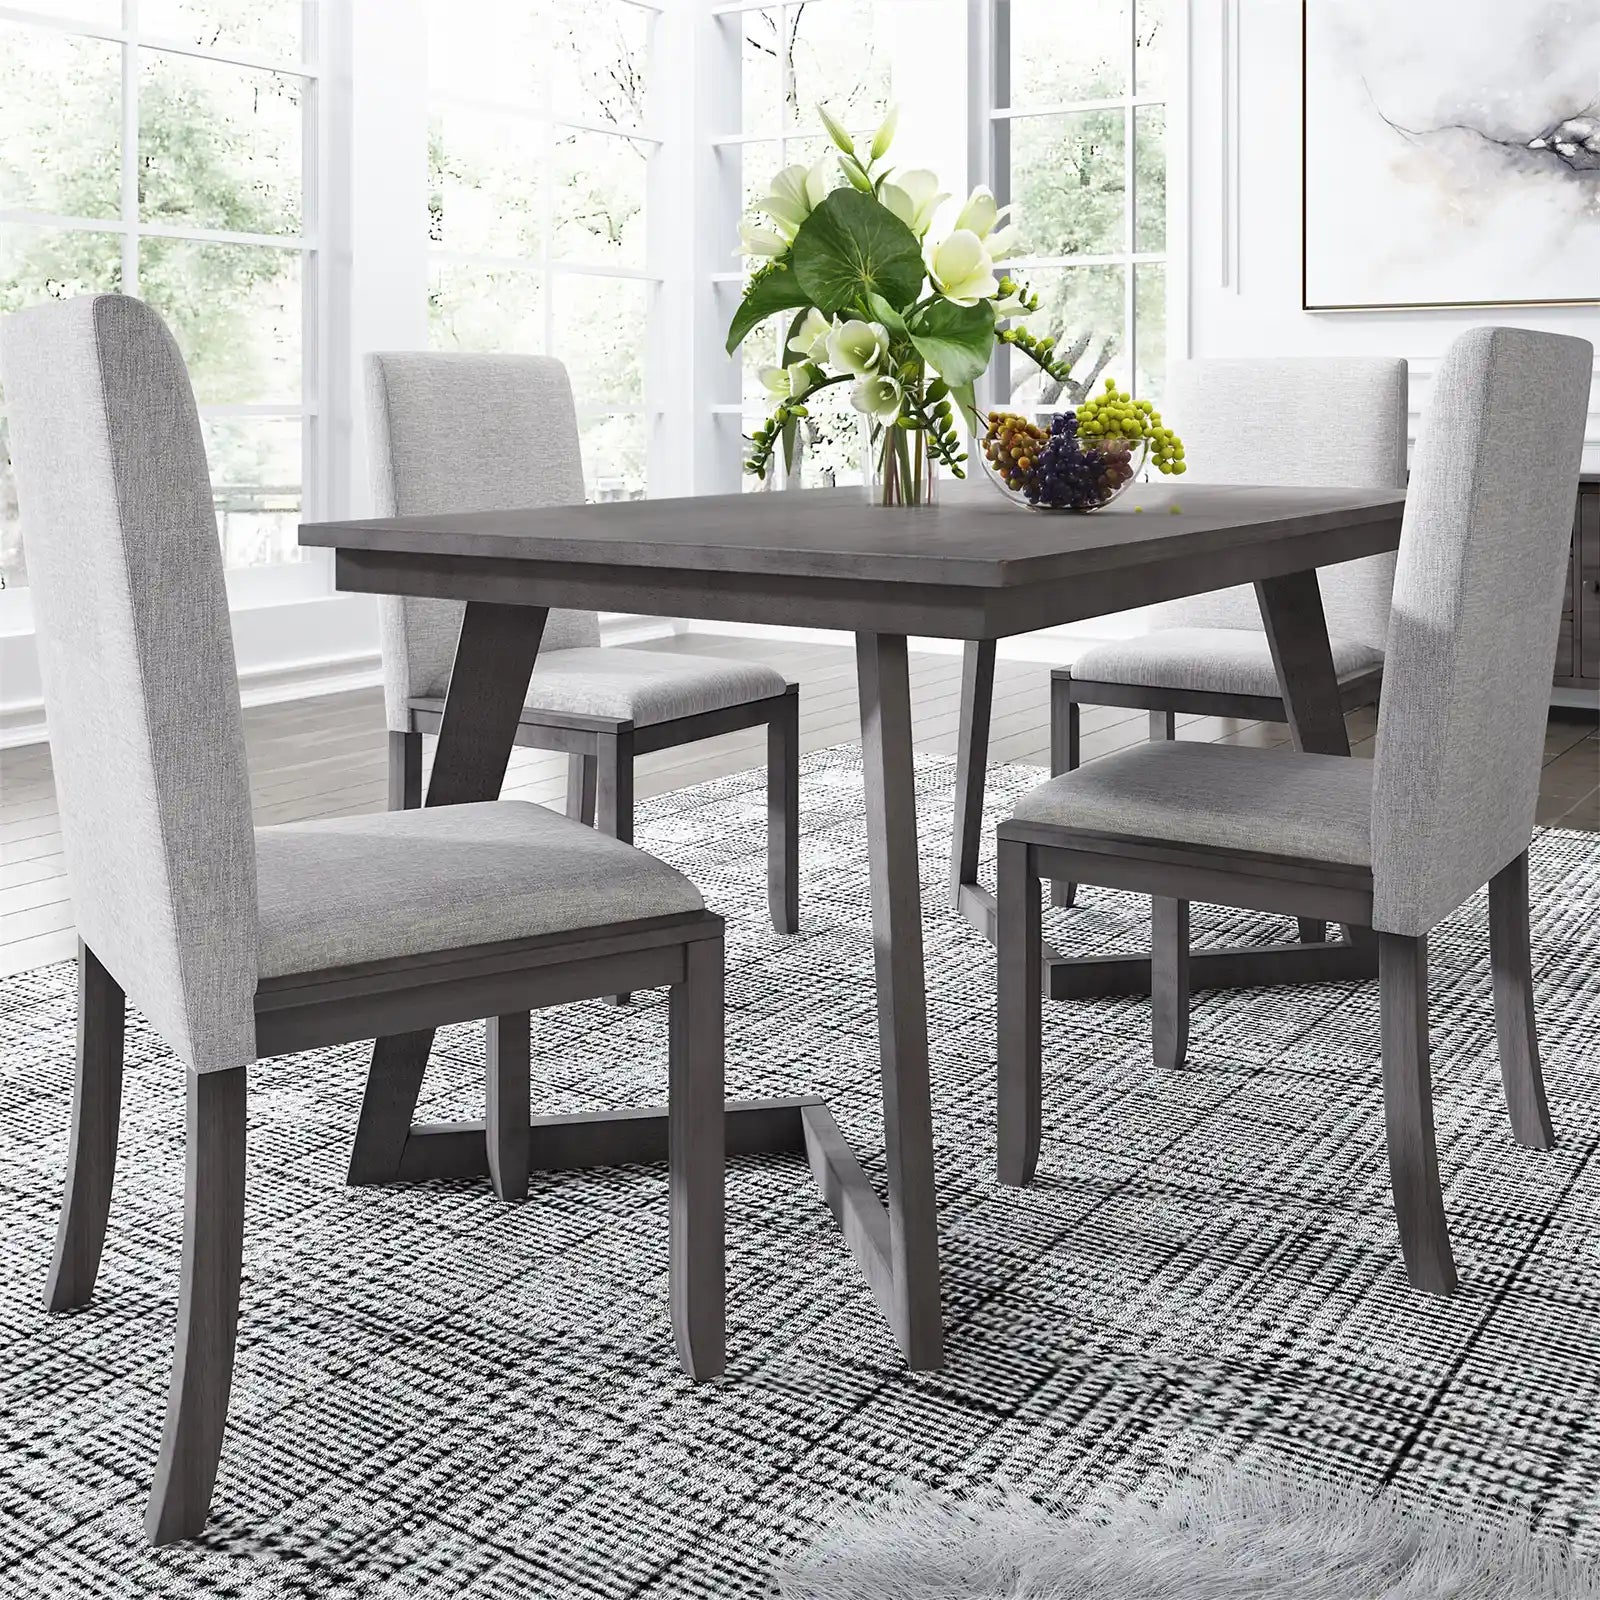 Dining Room Table and Chairs for 4, 5 Pieces Wood and Fabric Kitchen Dining Set